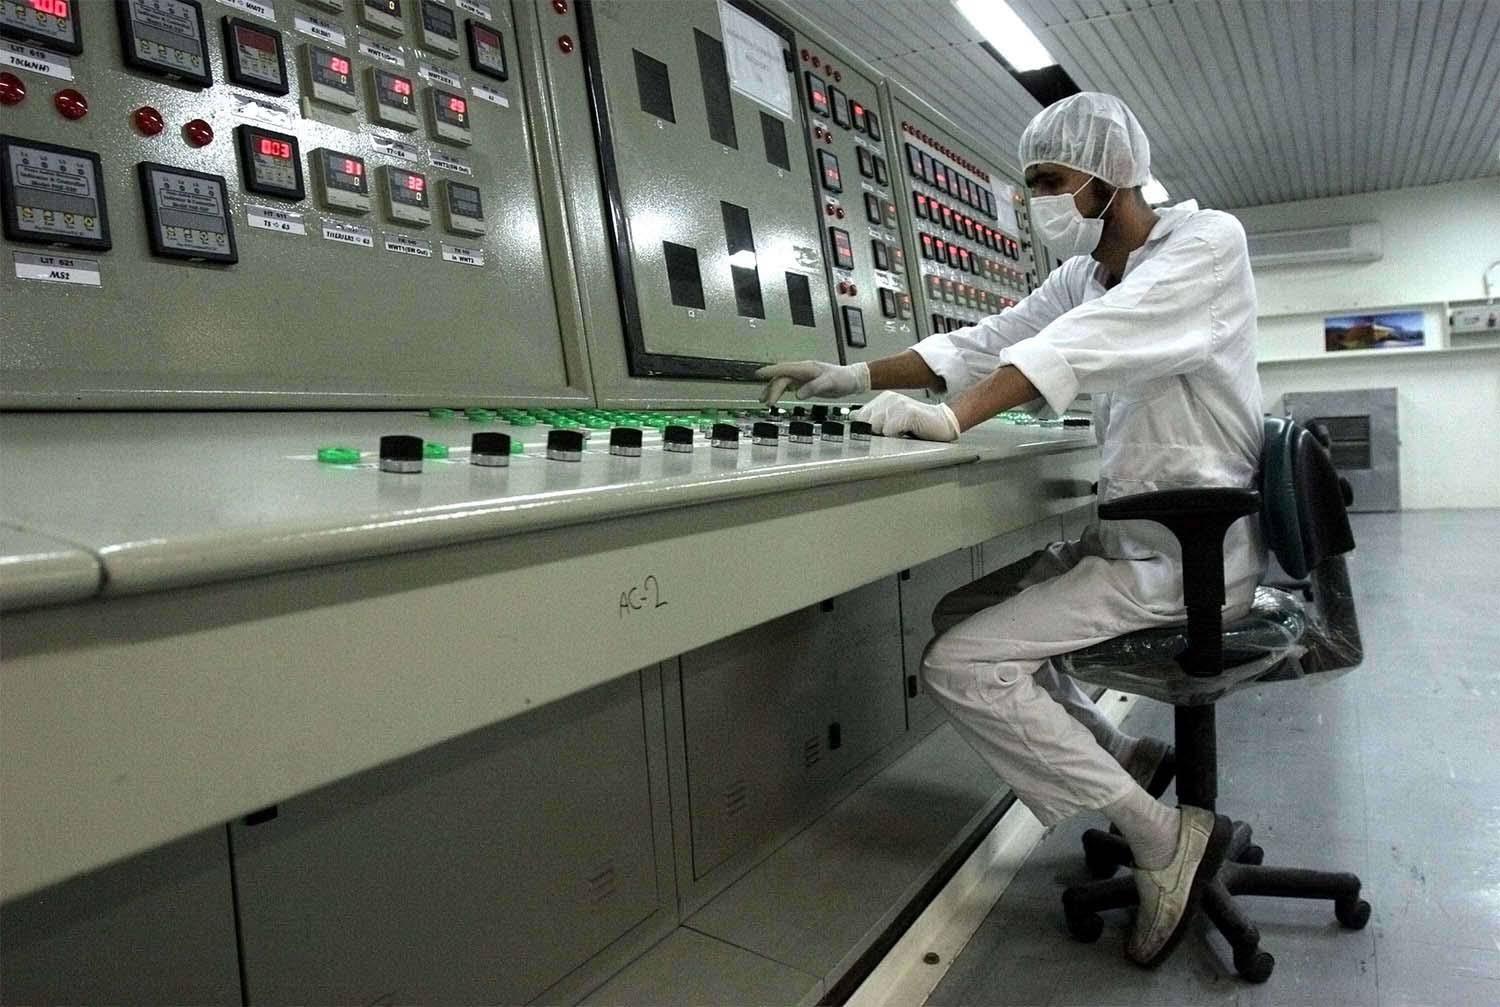 A technician works at the Uranium Conversion Facility just outside the city of Isfahan